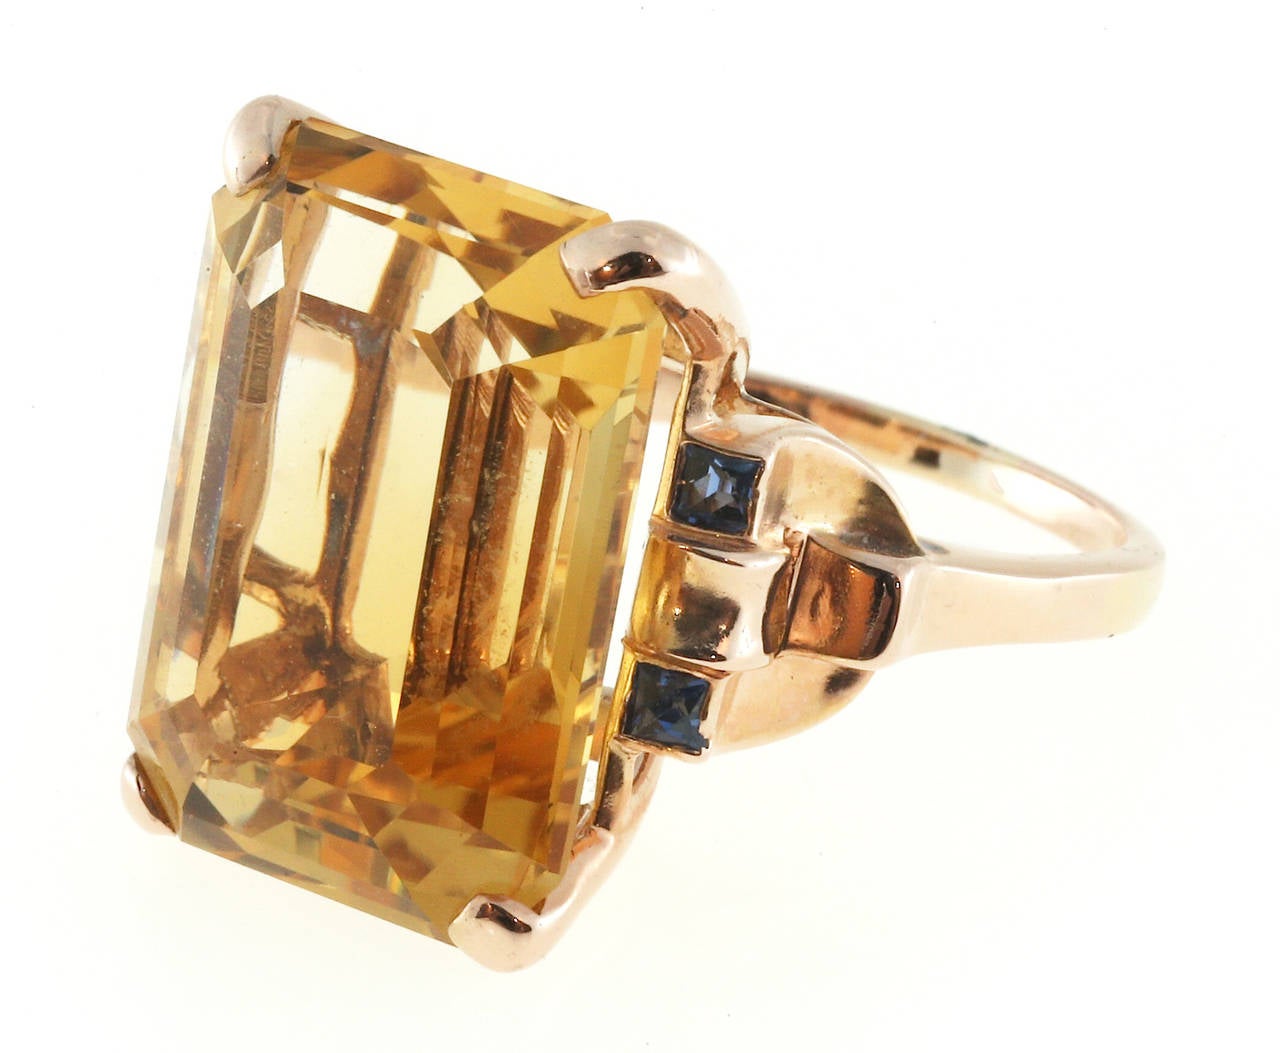 Art Deco Retro pink gold ring with a natural golden yellow 20.00ct Citrine and genuine Sapphire accents. Very good overall condition. The stone is well polished.

1 natural golden yellow Citrine approx. total weight 20.00cts, 19.5 x 14mm,